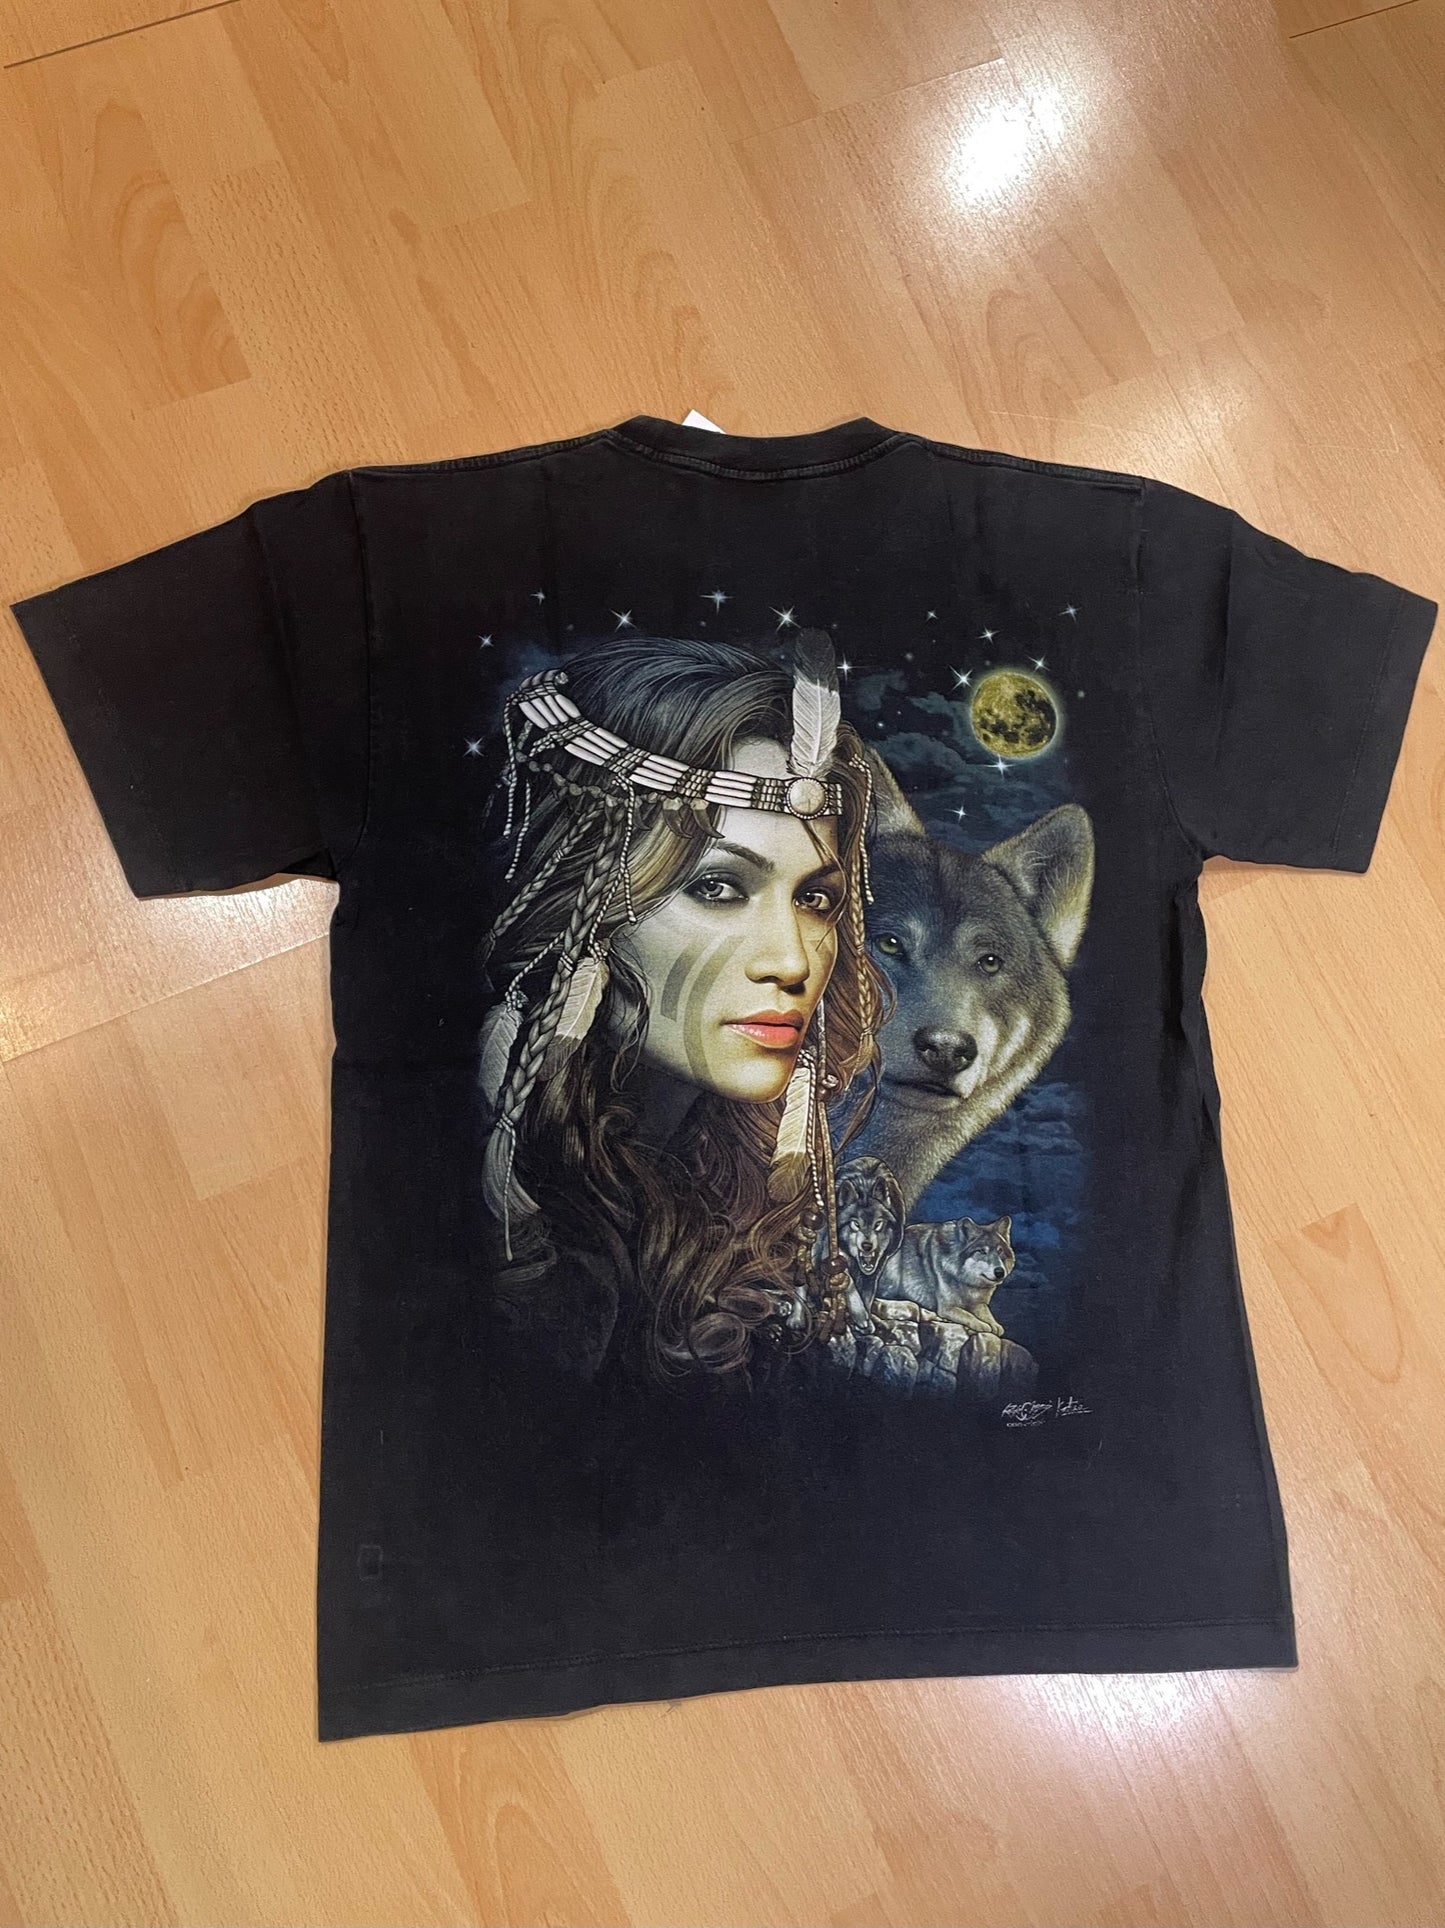 NATIVE AMERICAN & WOLF DOUBLE SIDED T-SHIRT  SZ: M